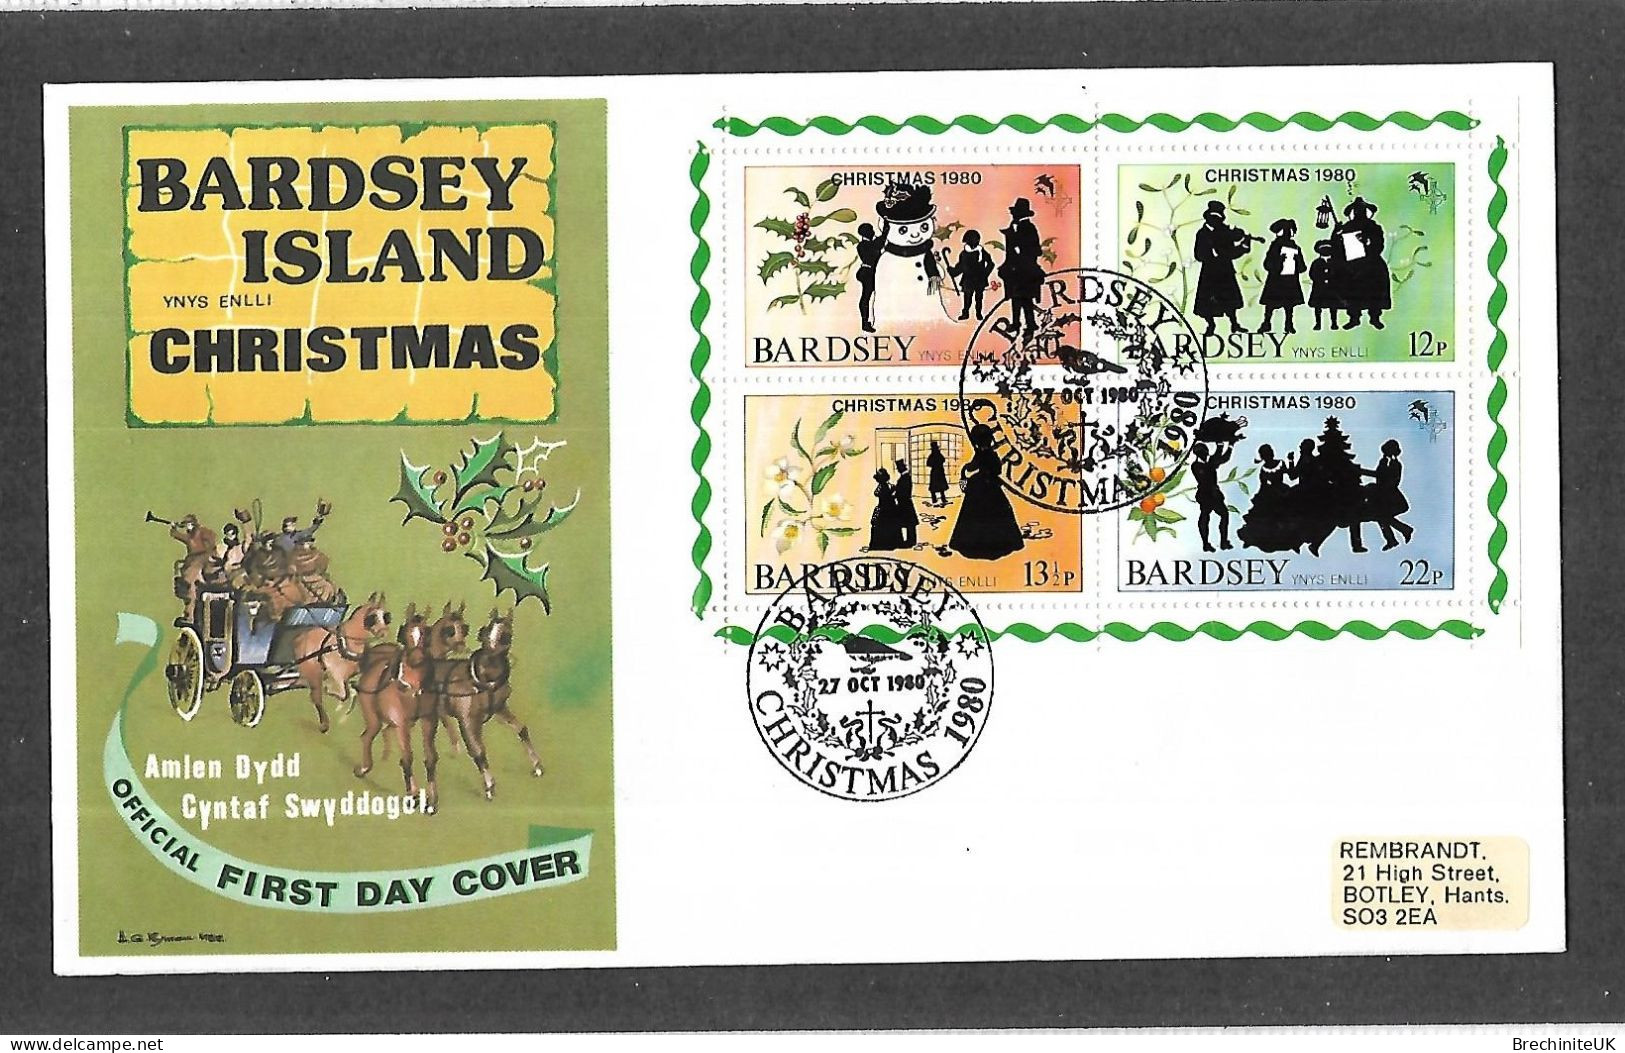 (N578) Great Britain BARDSEY ISLAND, 1980 Christmas Stamp Minisheet FDC - Local Issues